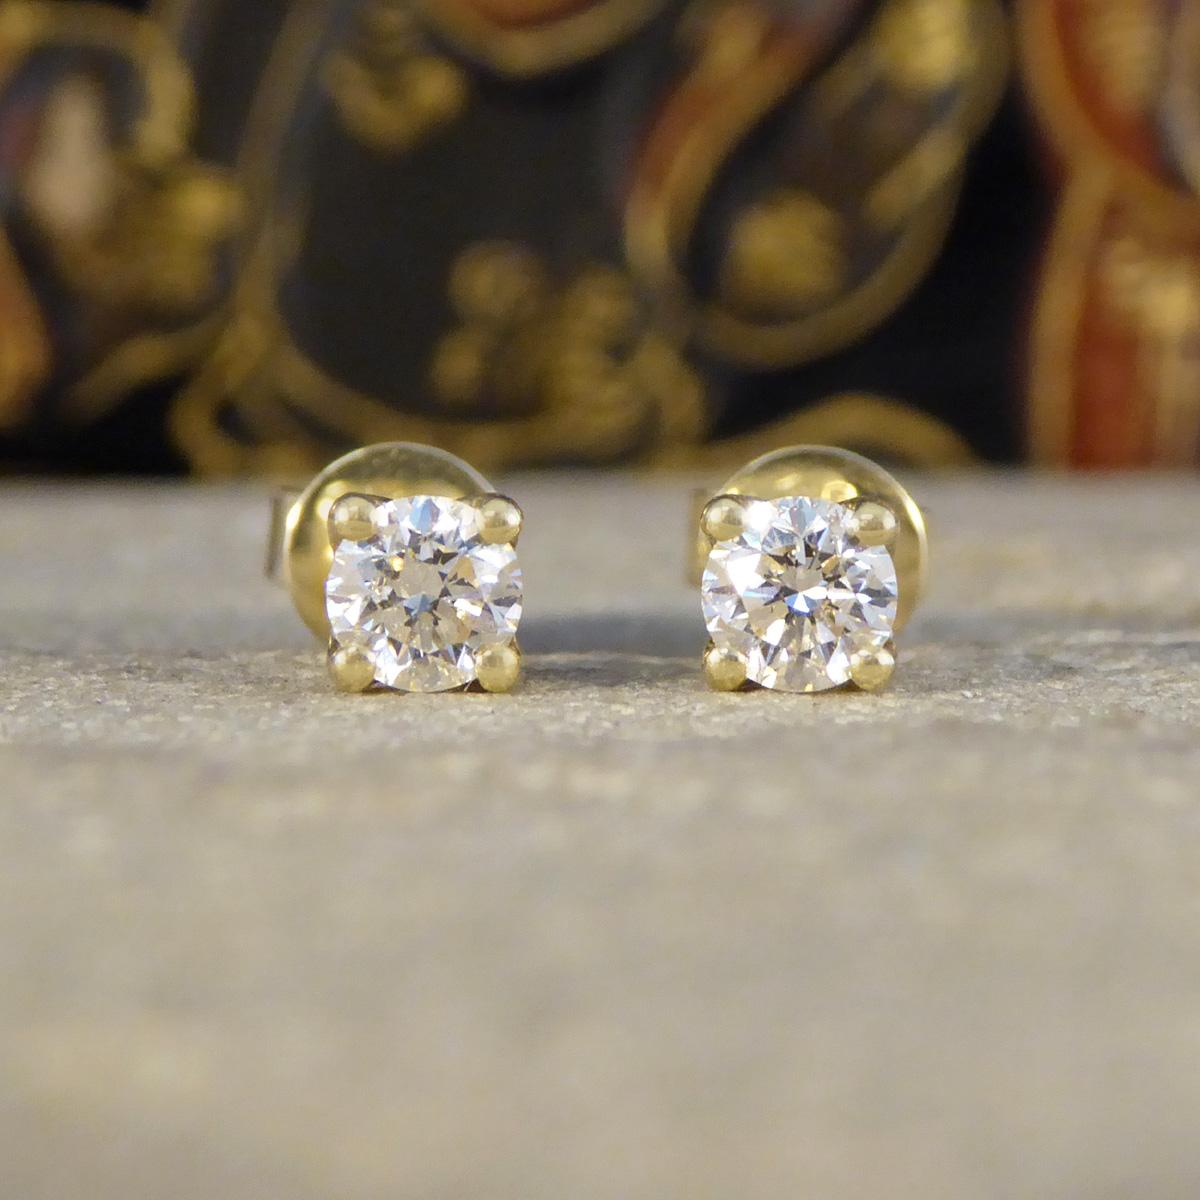 The perfect pair of stud earrings for everyday wear. Each stud is set with a Round Brilliant Cut Diamond, matching well in colour and clarity with a warm feel in Yellow Gold and weighing a total of 0.50ct. Each Diamond sits in a 9ct Yellow Gold four